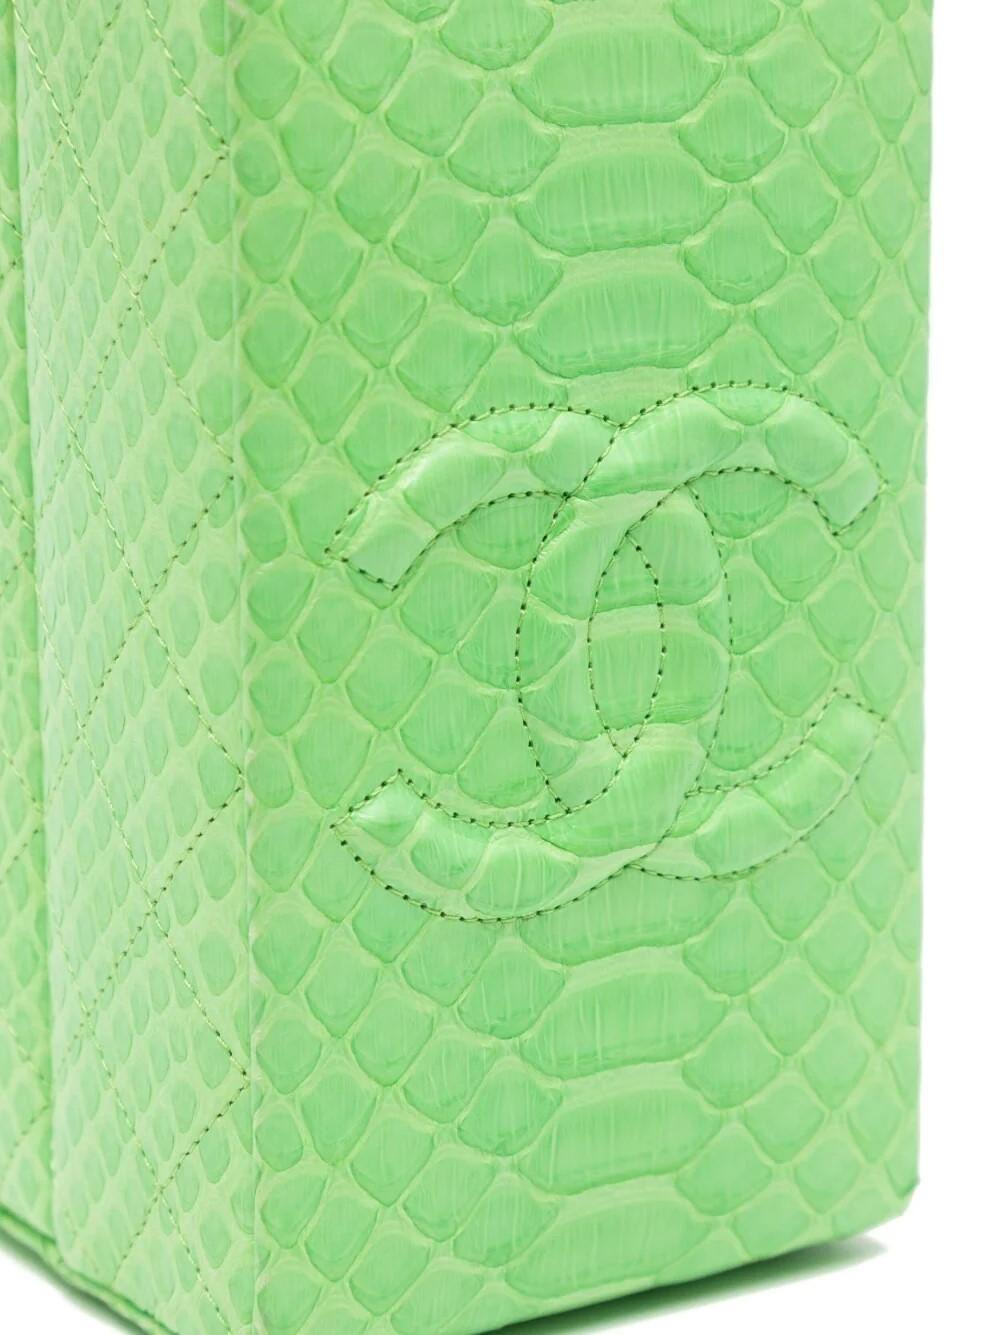 First seen in Chanel's Autumn/Winter 2014 runway Collection, inspired by the supermarket, the Lait de Coco minaudière is an exemplary collectors item. For this collection, Karl Lagerfeld transformed everyday items into beautifully crafted